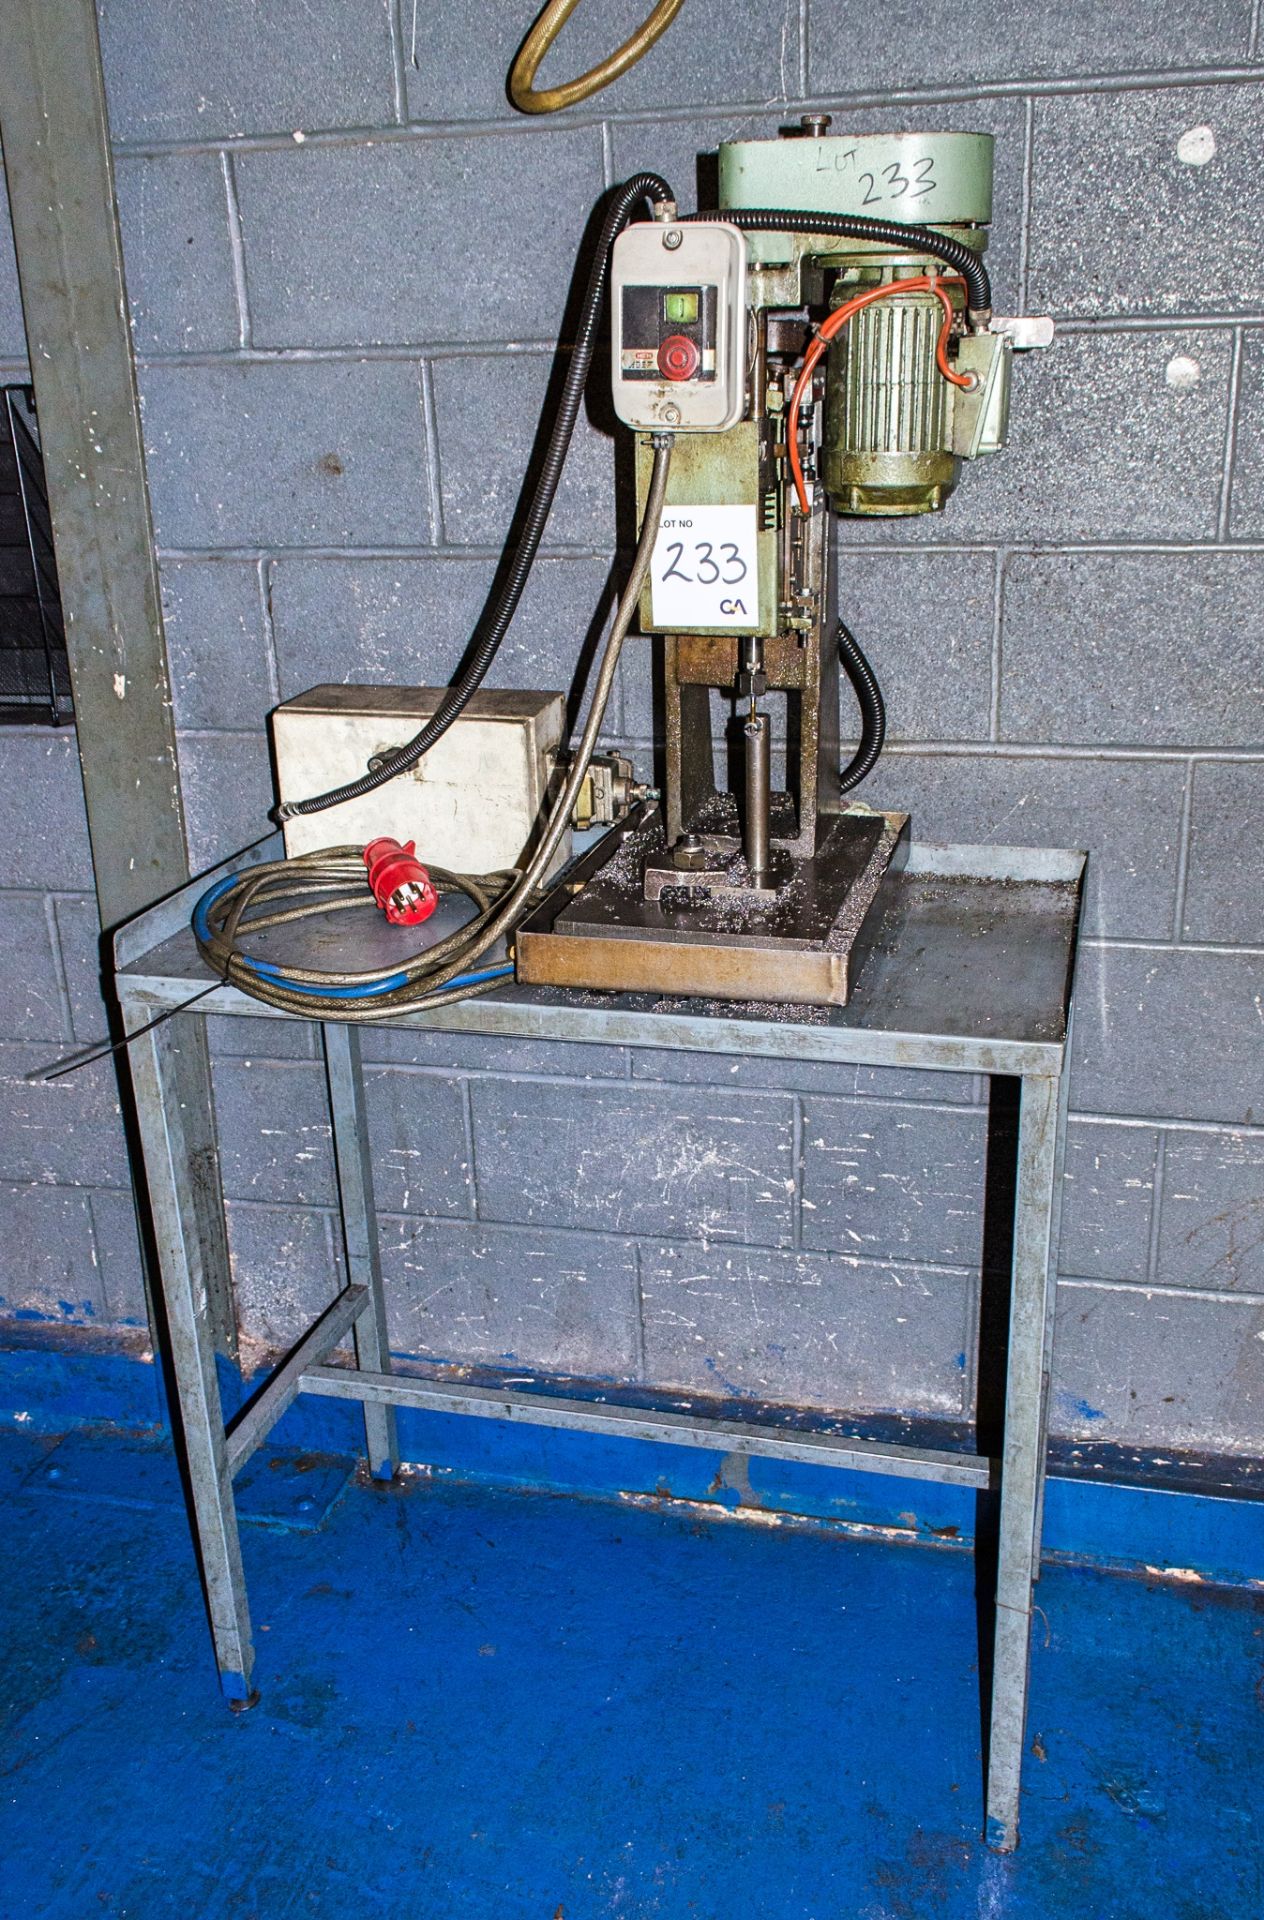 Tapping machine c/w steel bench